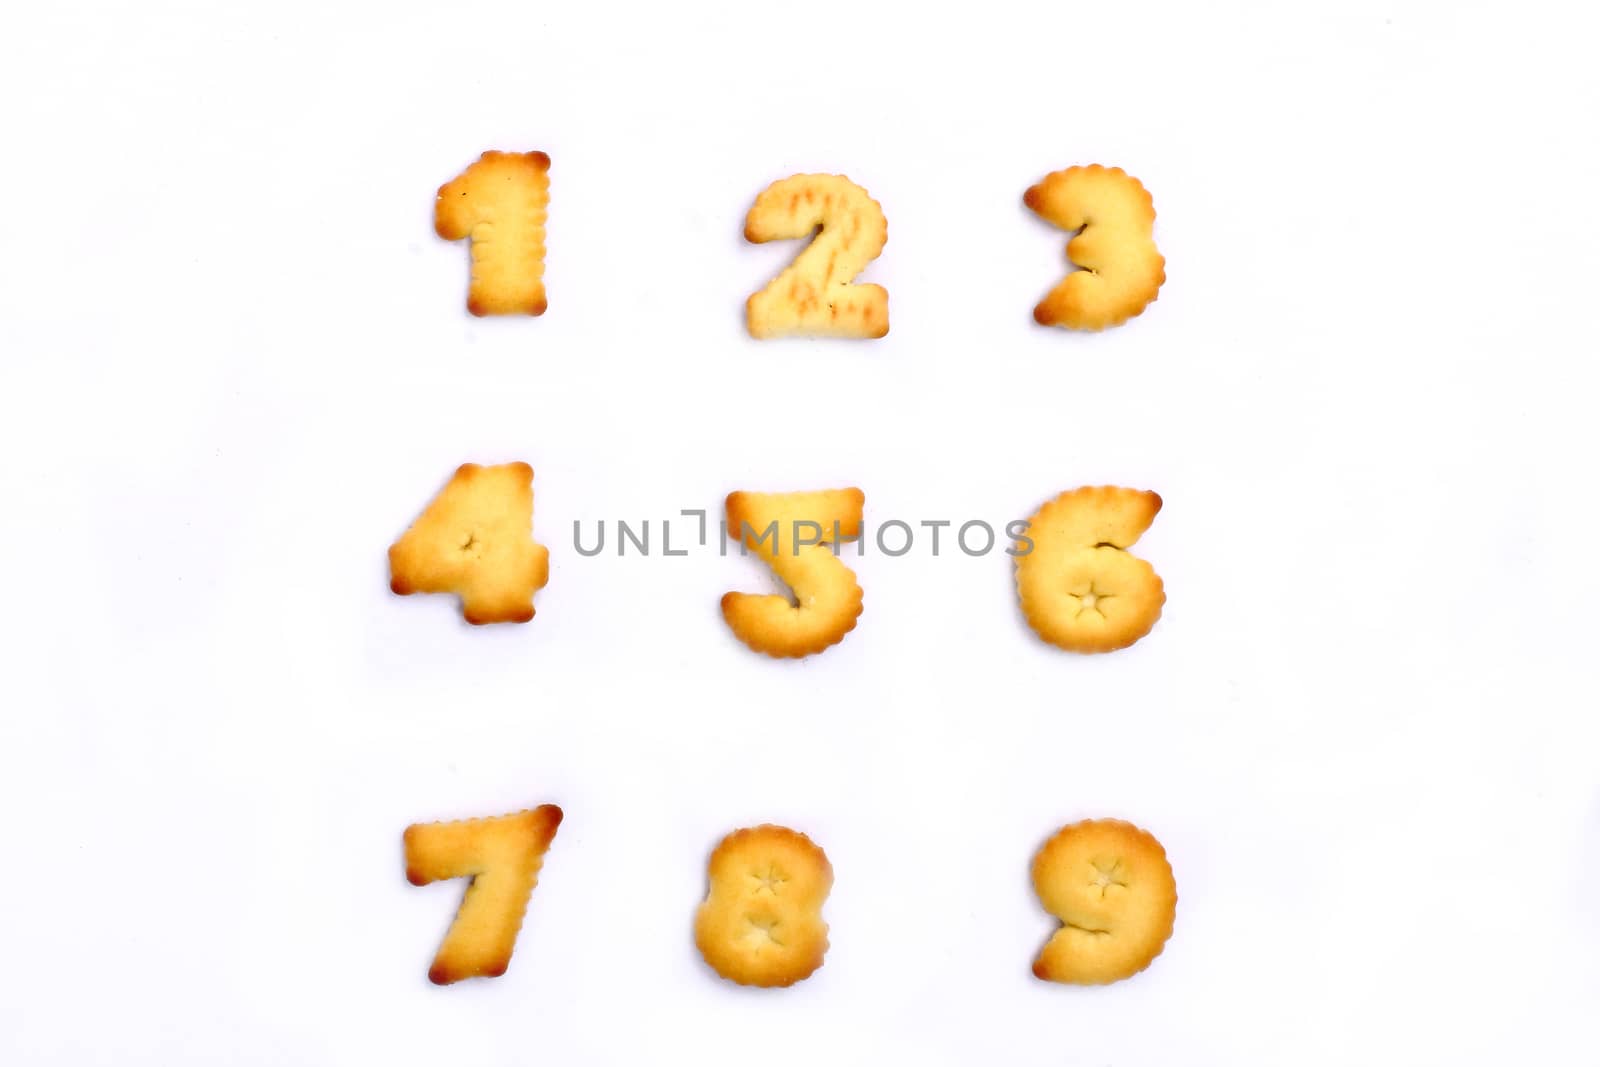 cookkies number cracker on white background